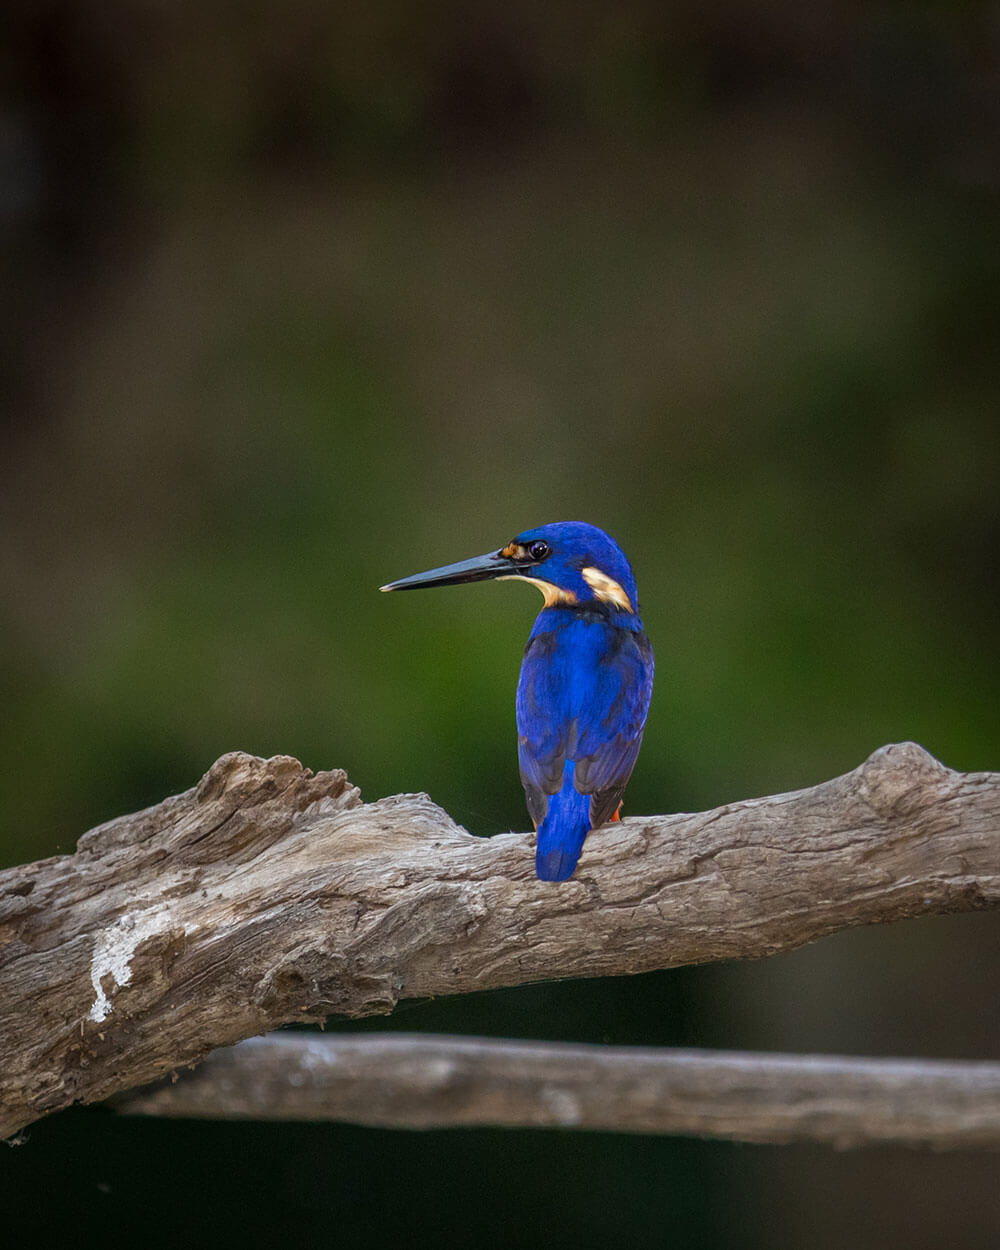 Image of a Azure Kingfisher at Hilliard’s Creek, Birkdale